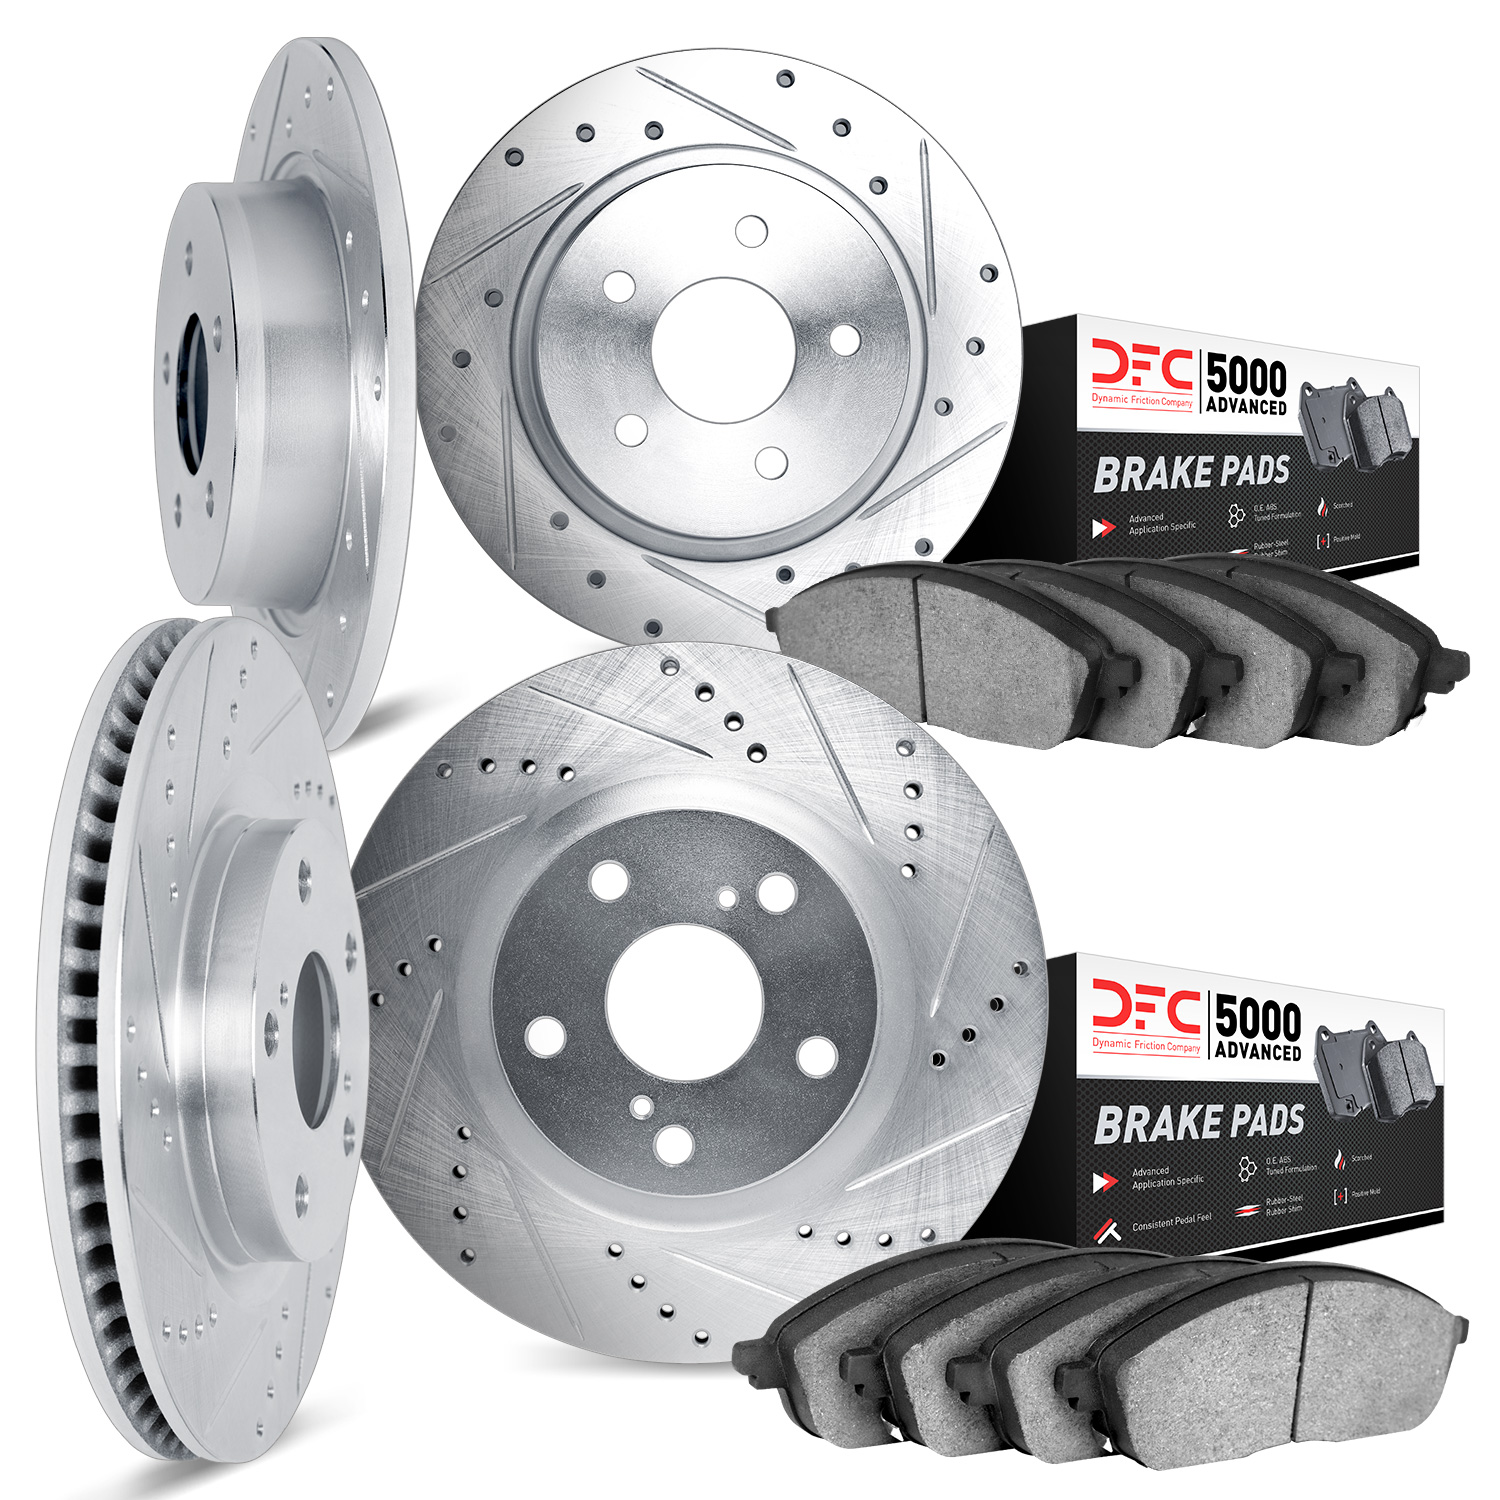 7504-42063 Drilled/Slotted Brake Rotors w/5000 Advanced Brake Pads Kit [Silver], 1999-2004 Mopar, Position: Front and Rear